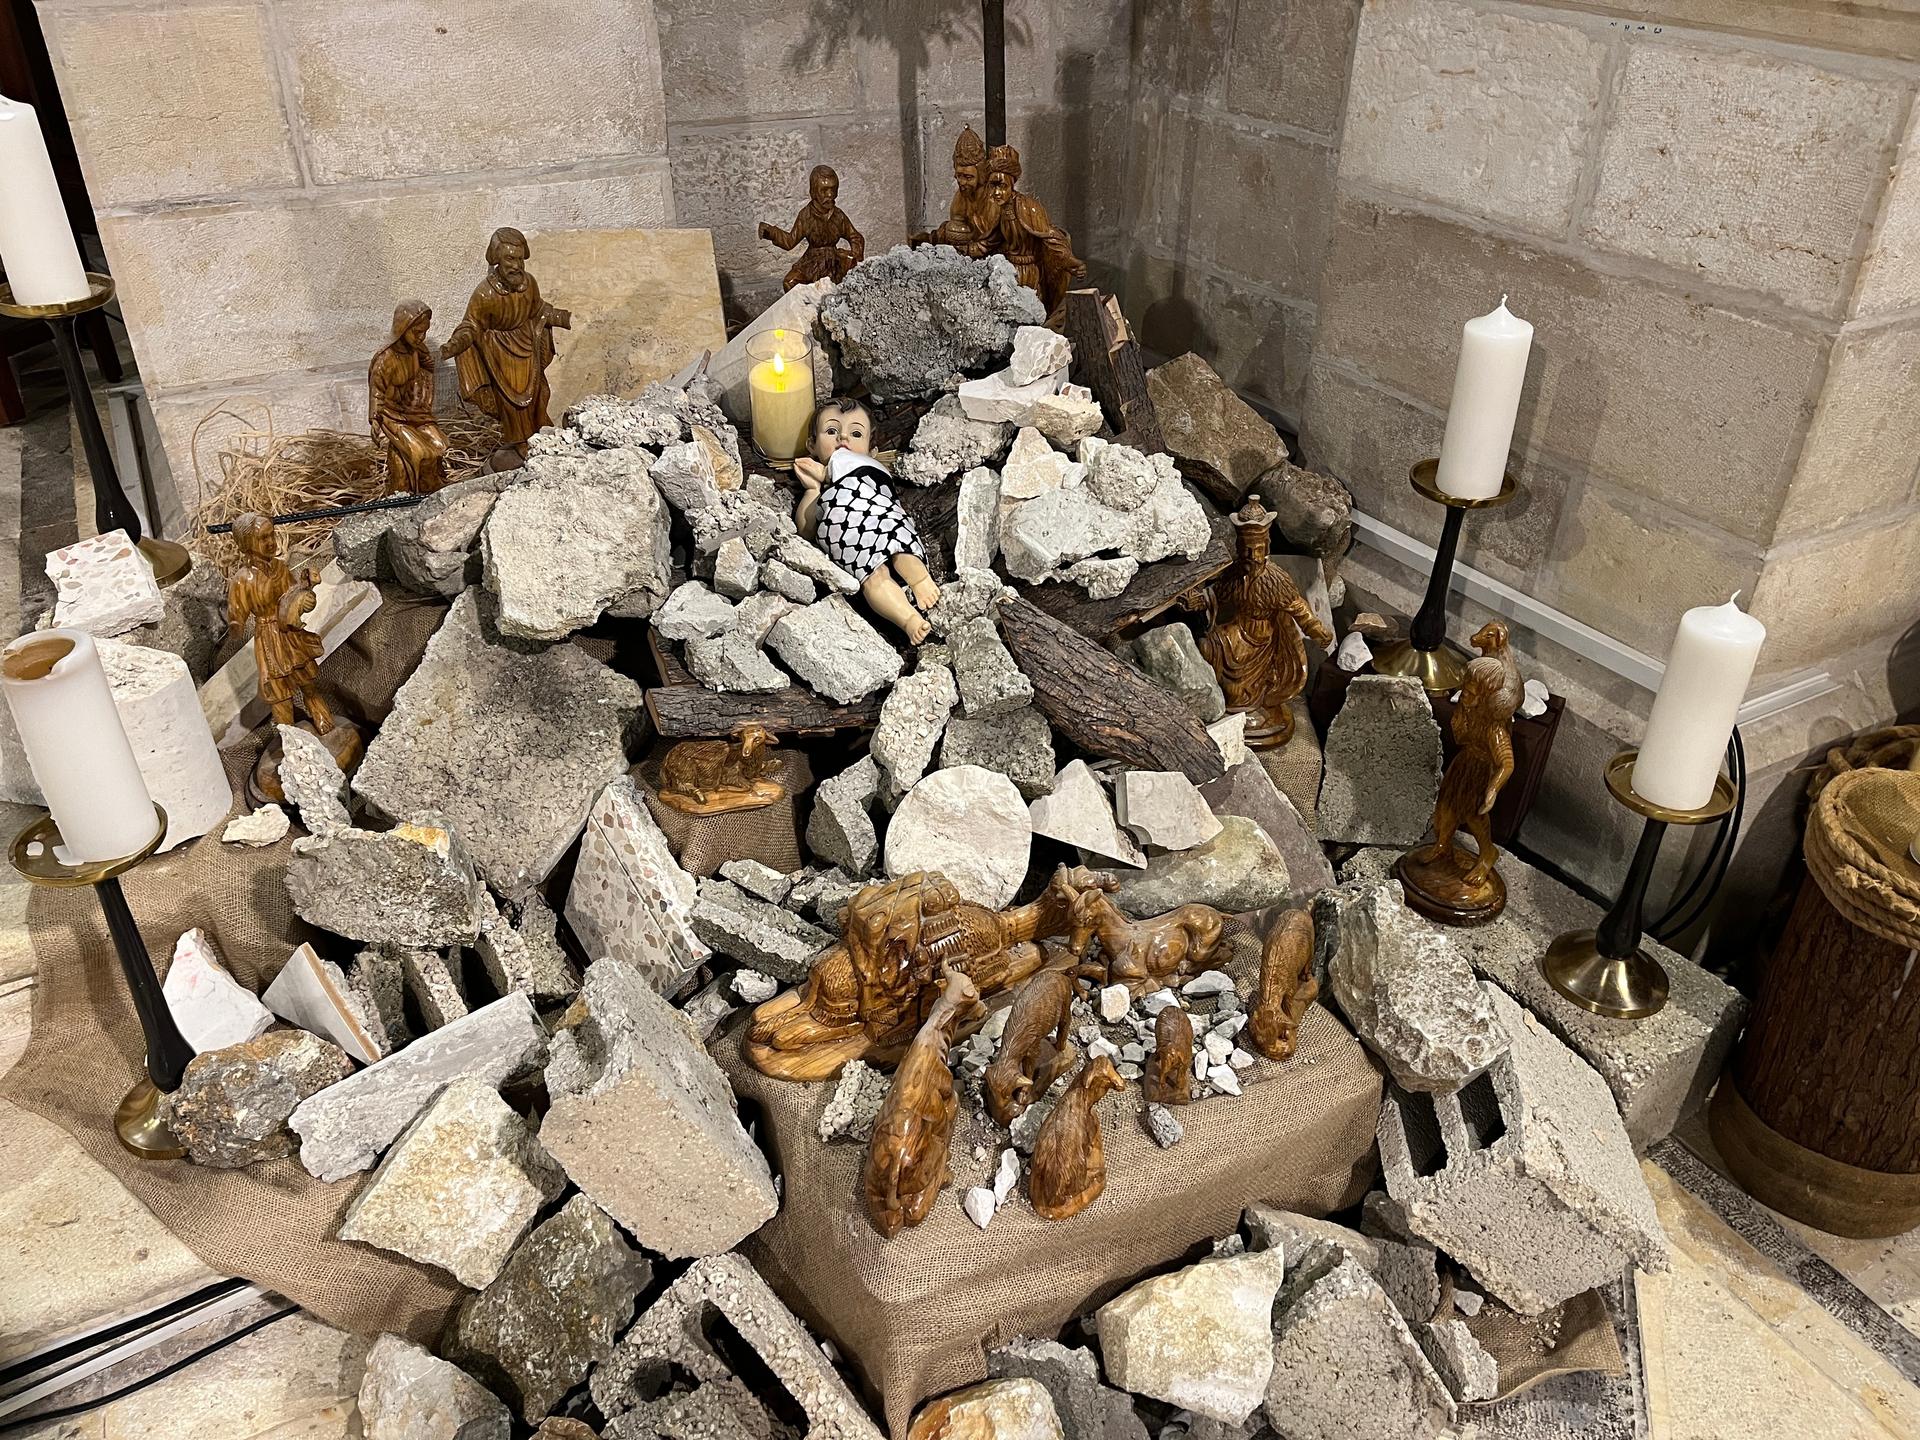 A rubble mound with a doll to be Jesus meant to reflect a broken nativity scene